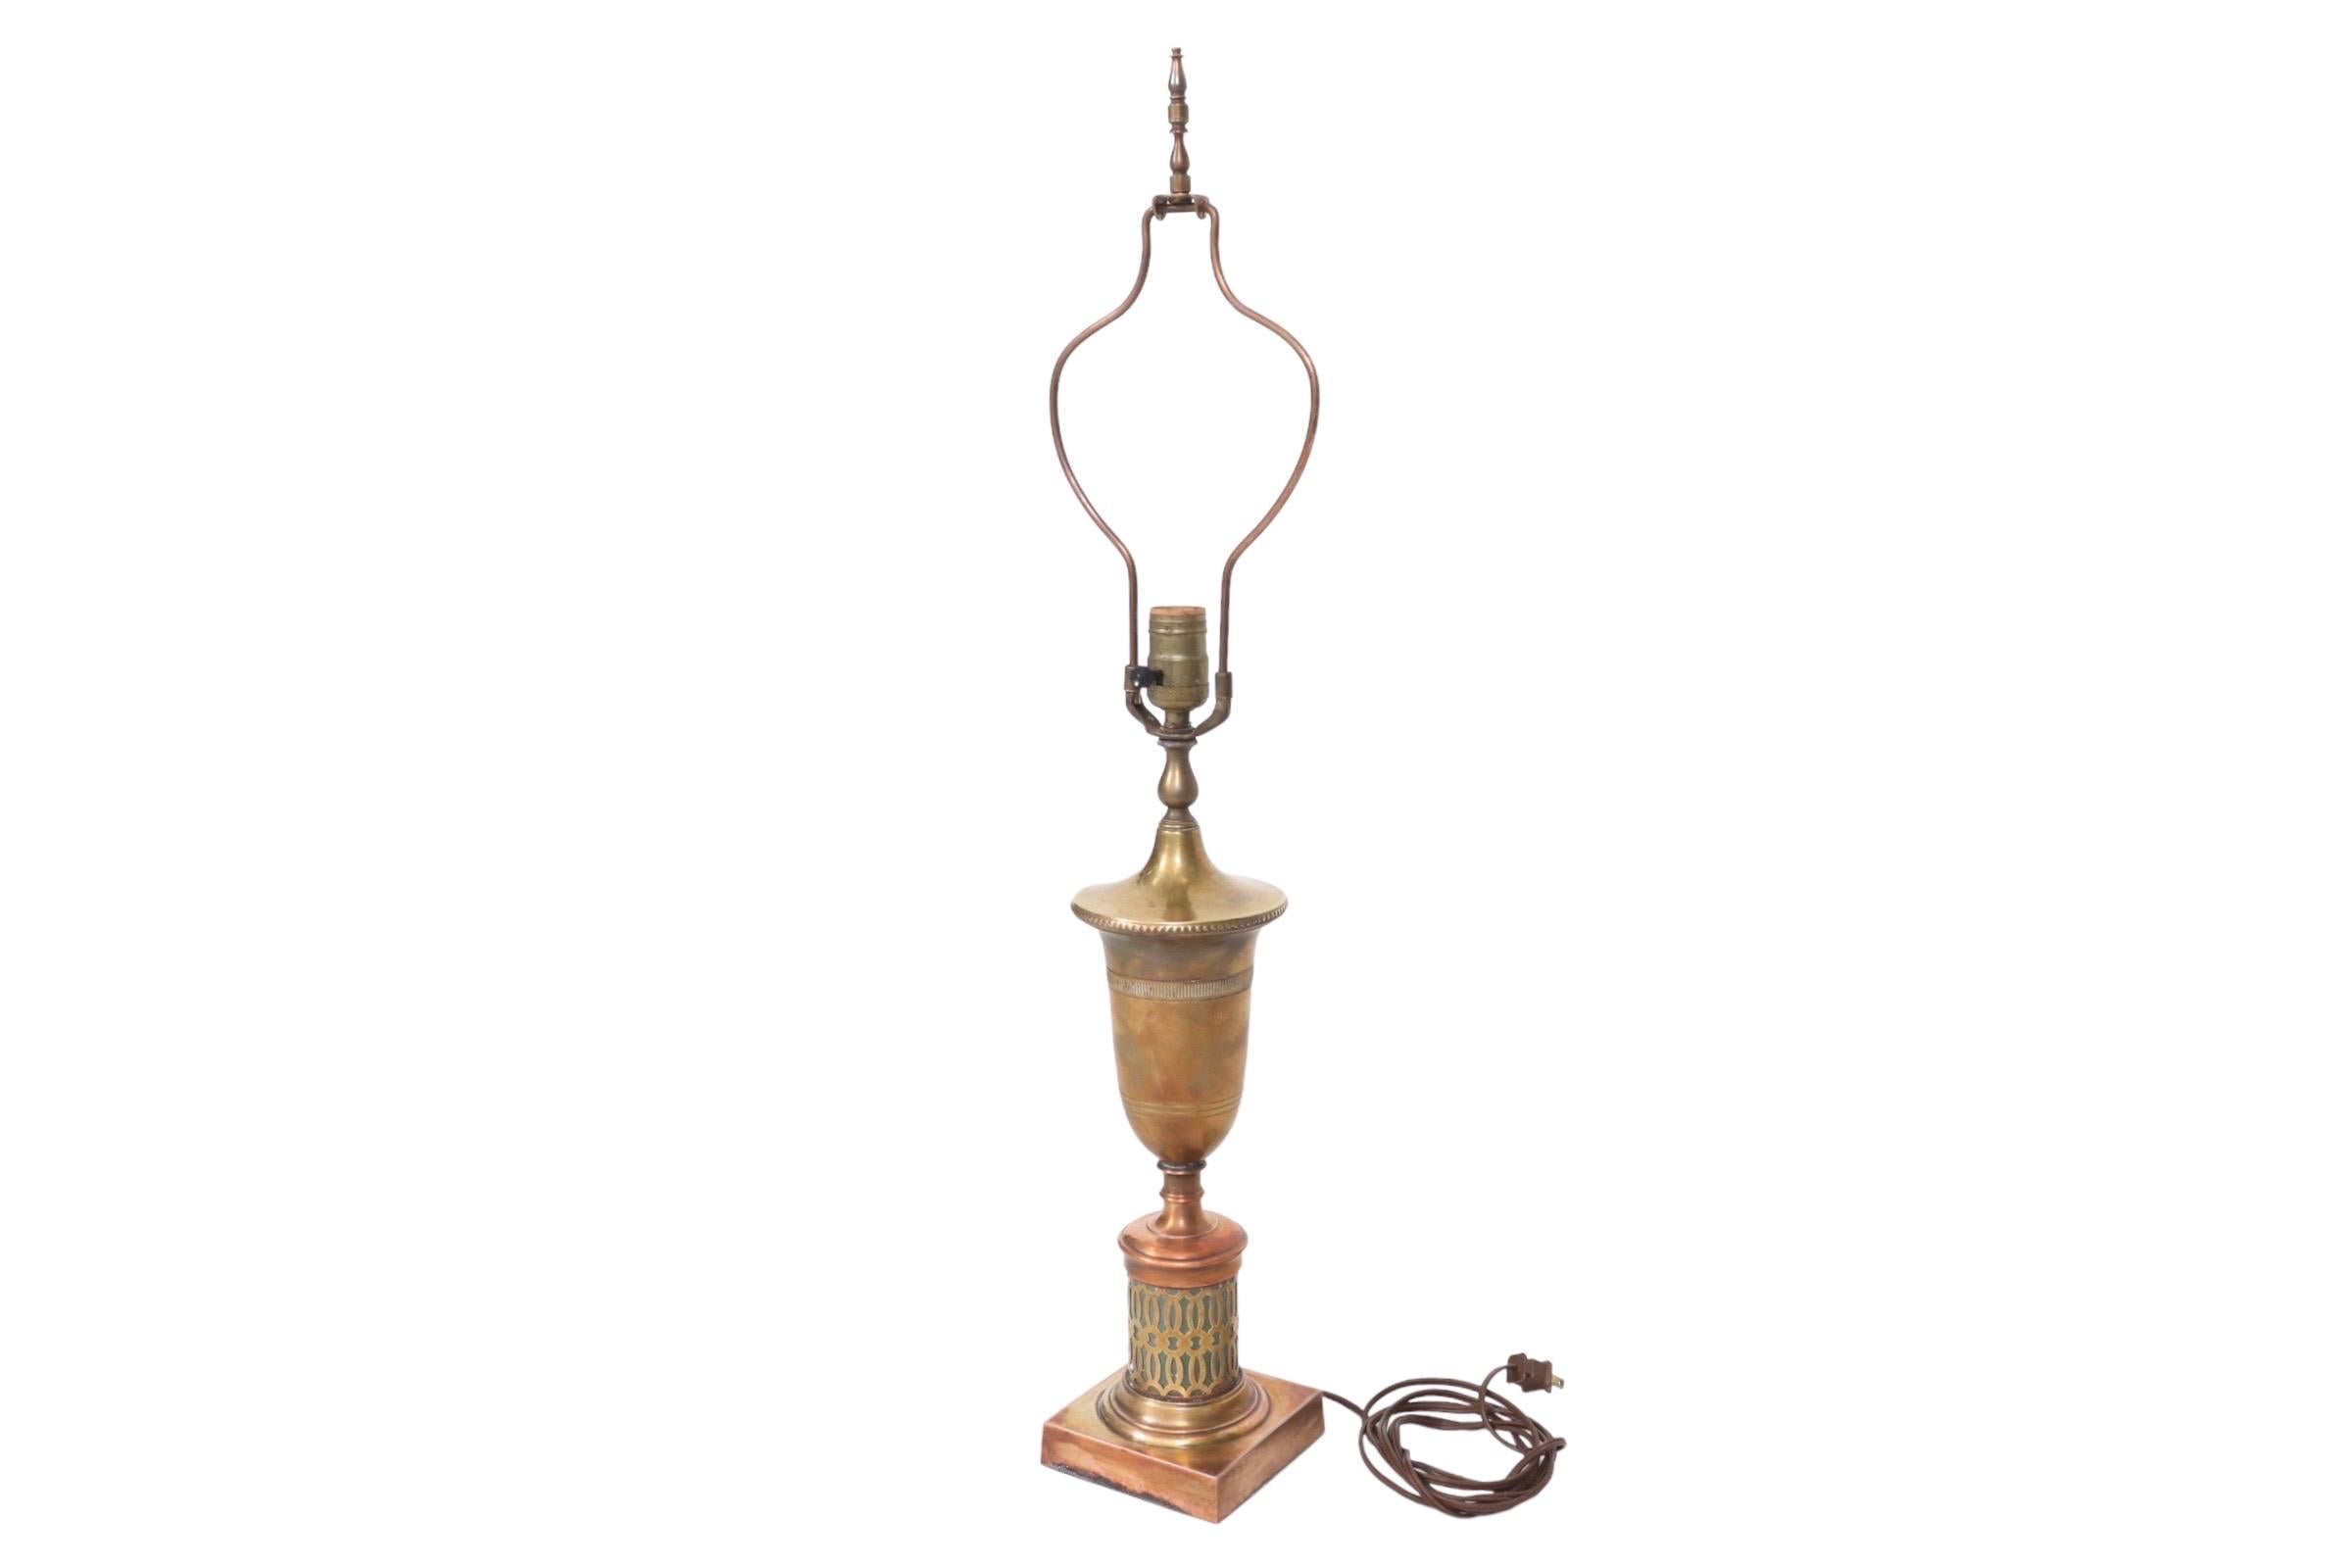 An Indian style table lamp made of copper and brass. An unusual baluster shaped harp has a tall turned finial, above a simply decorated brass vase. Below, is a teal base inside a pierced copper lattice with a square foot. Measures 4.75